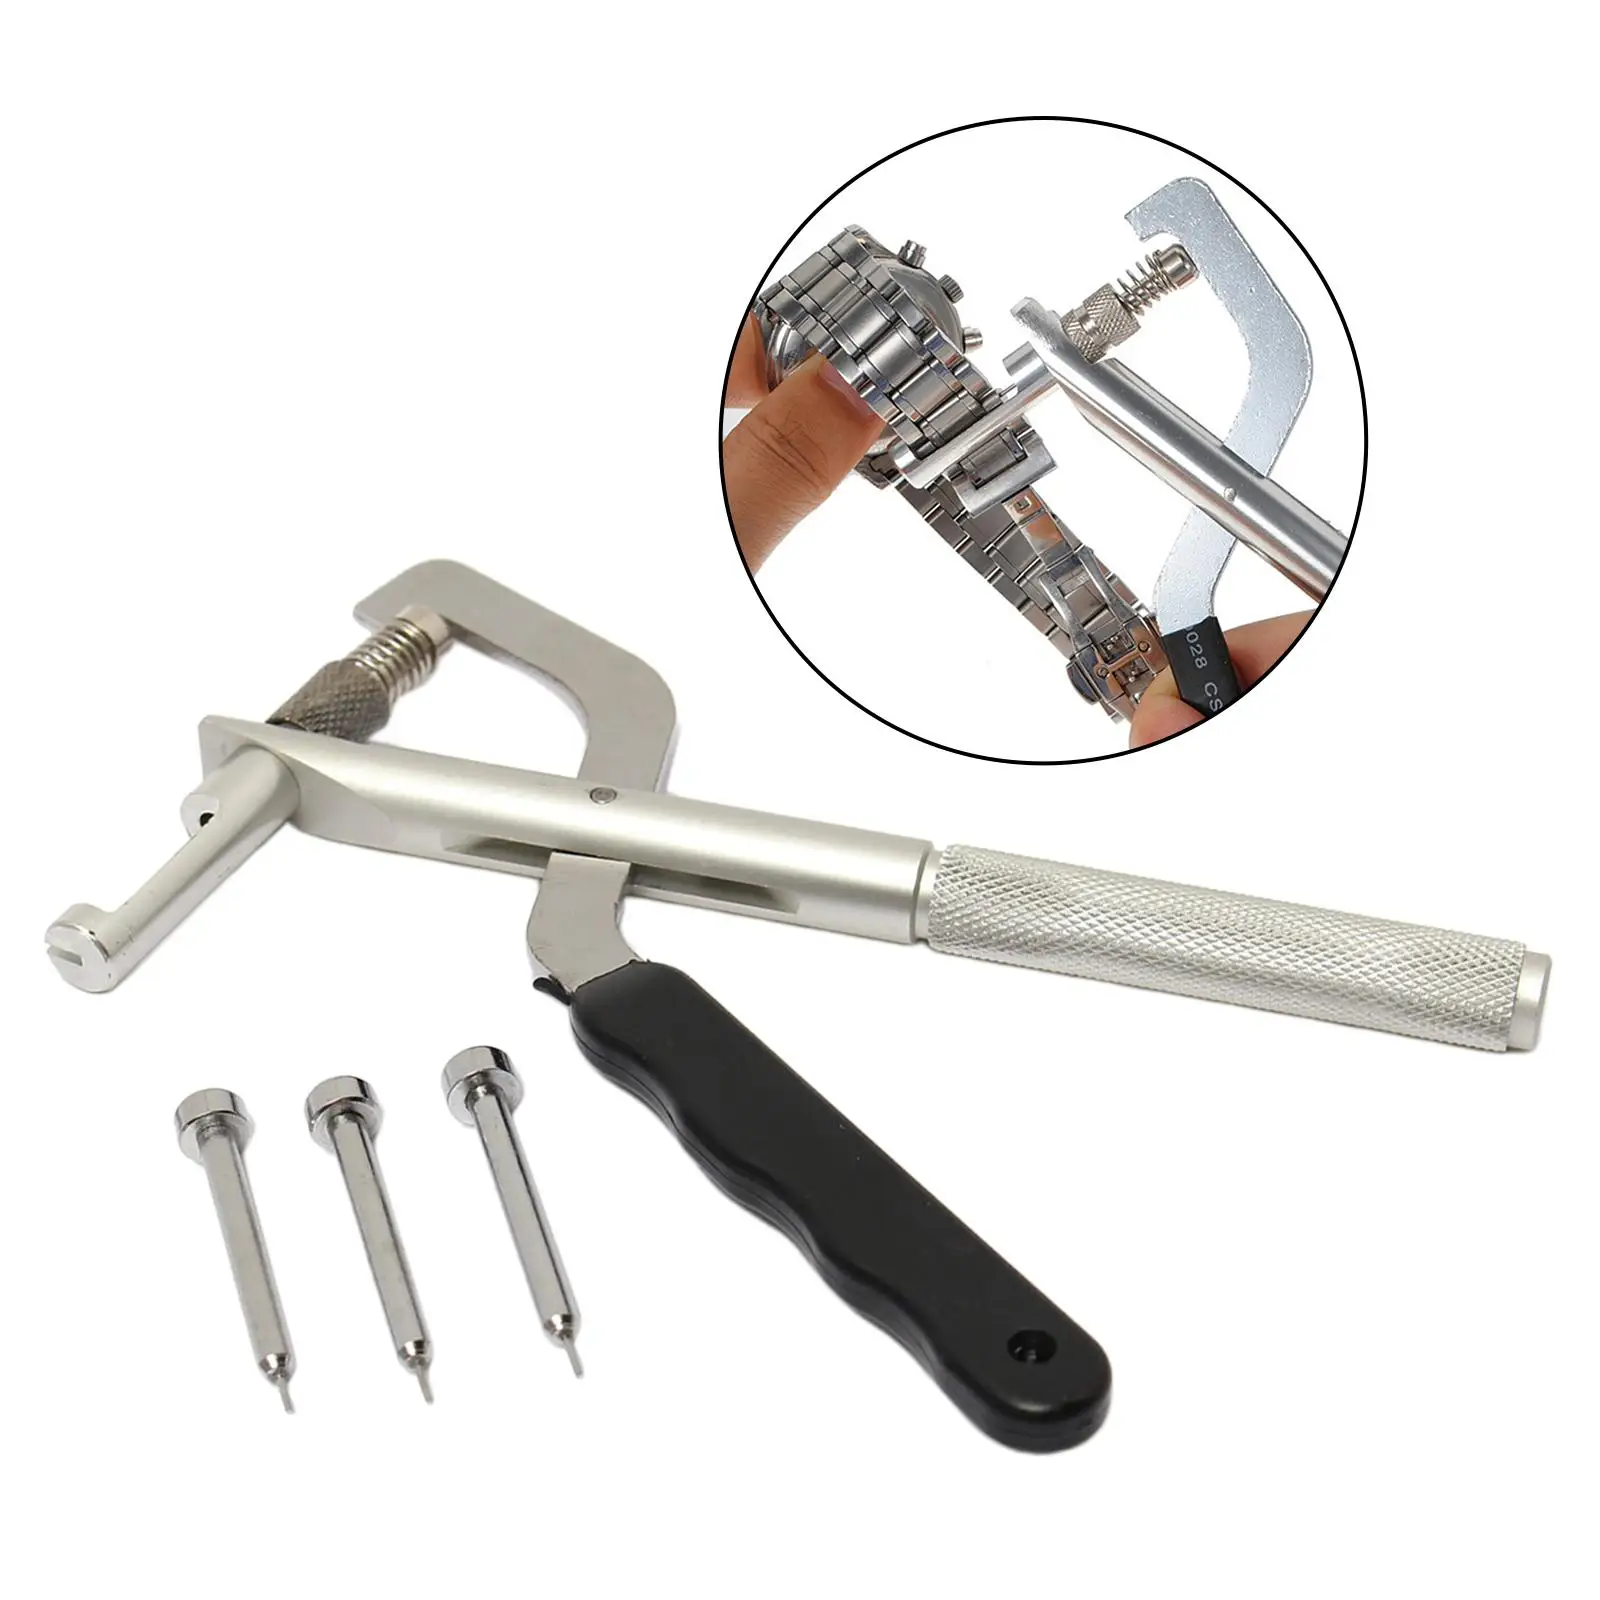 Wrist Pins Remover Spring Bar Plier Puncher Repair Tools